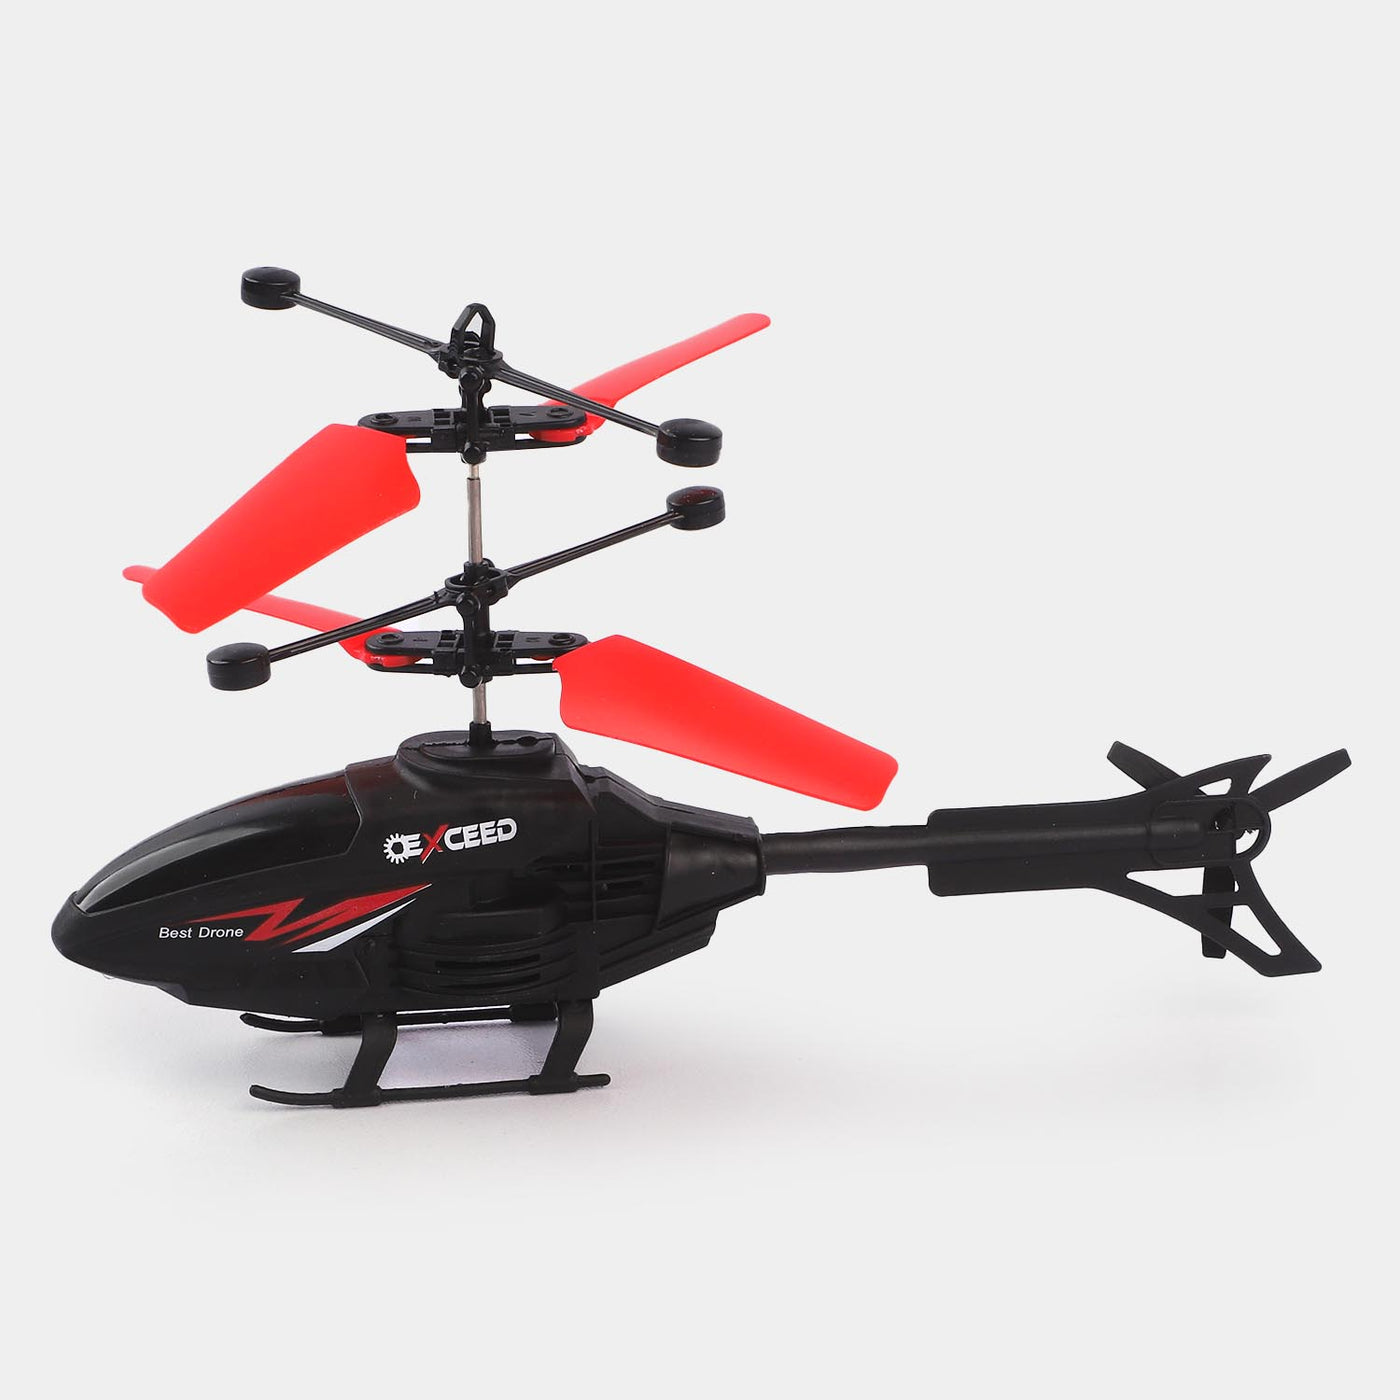 Dynamic Motion Sensing Helicopter